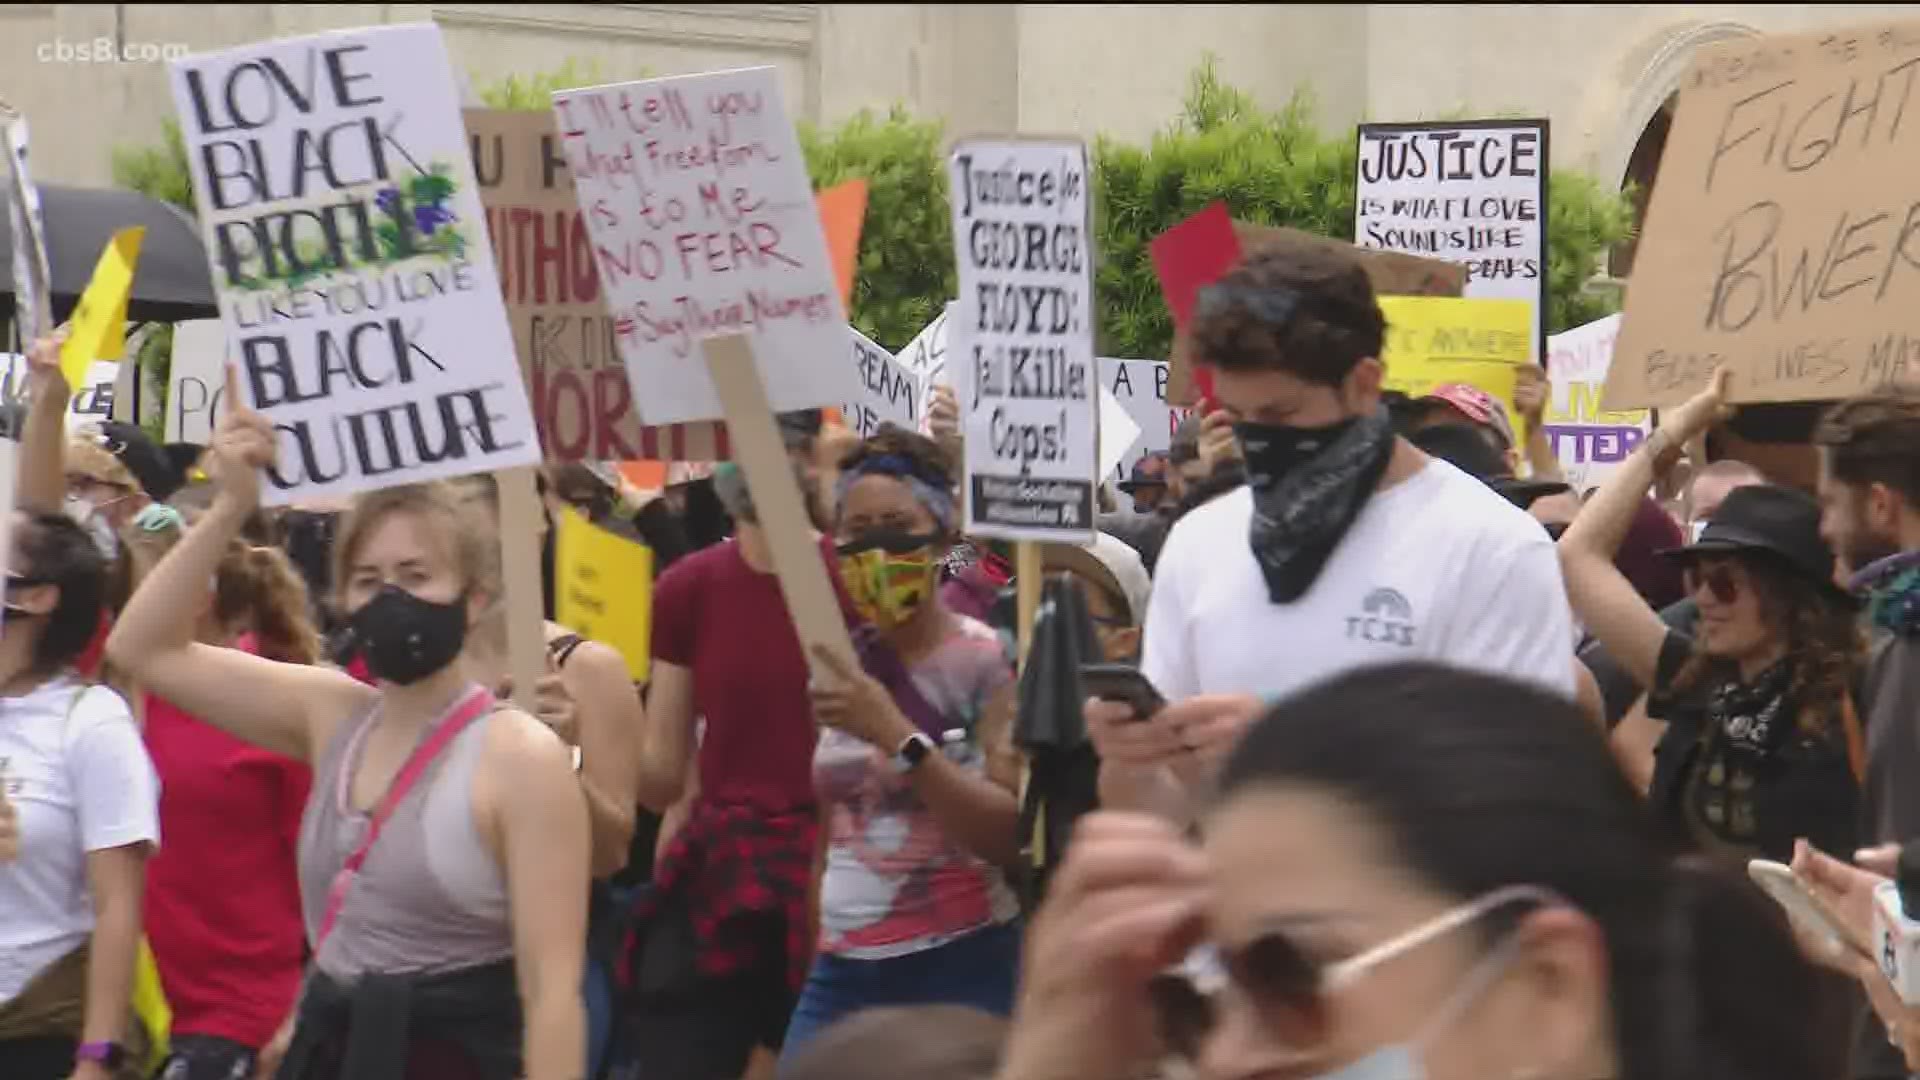 Protests were held all over the county, from downtown to Torrey Pines, all the way up to Vista.